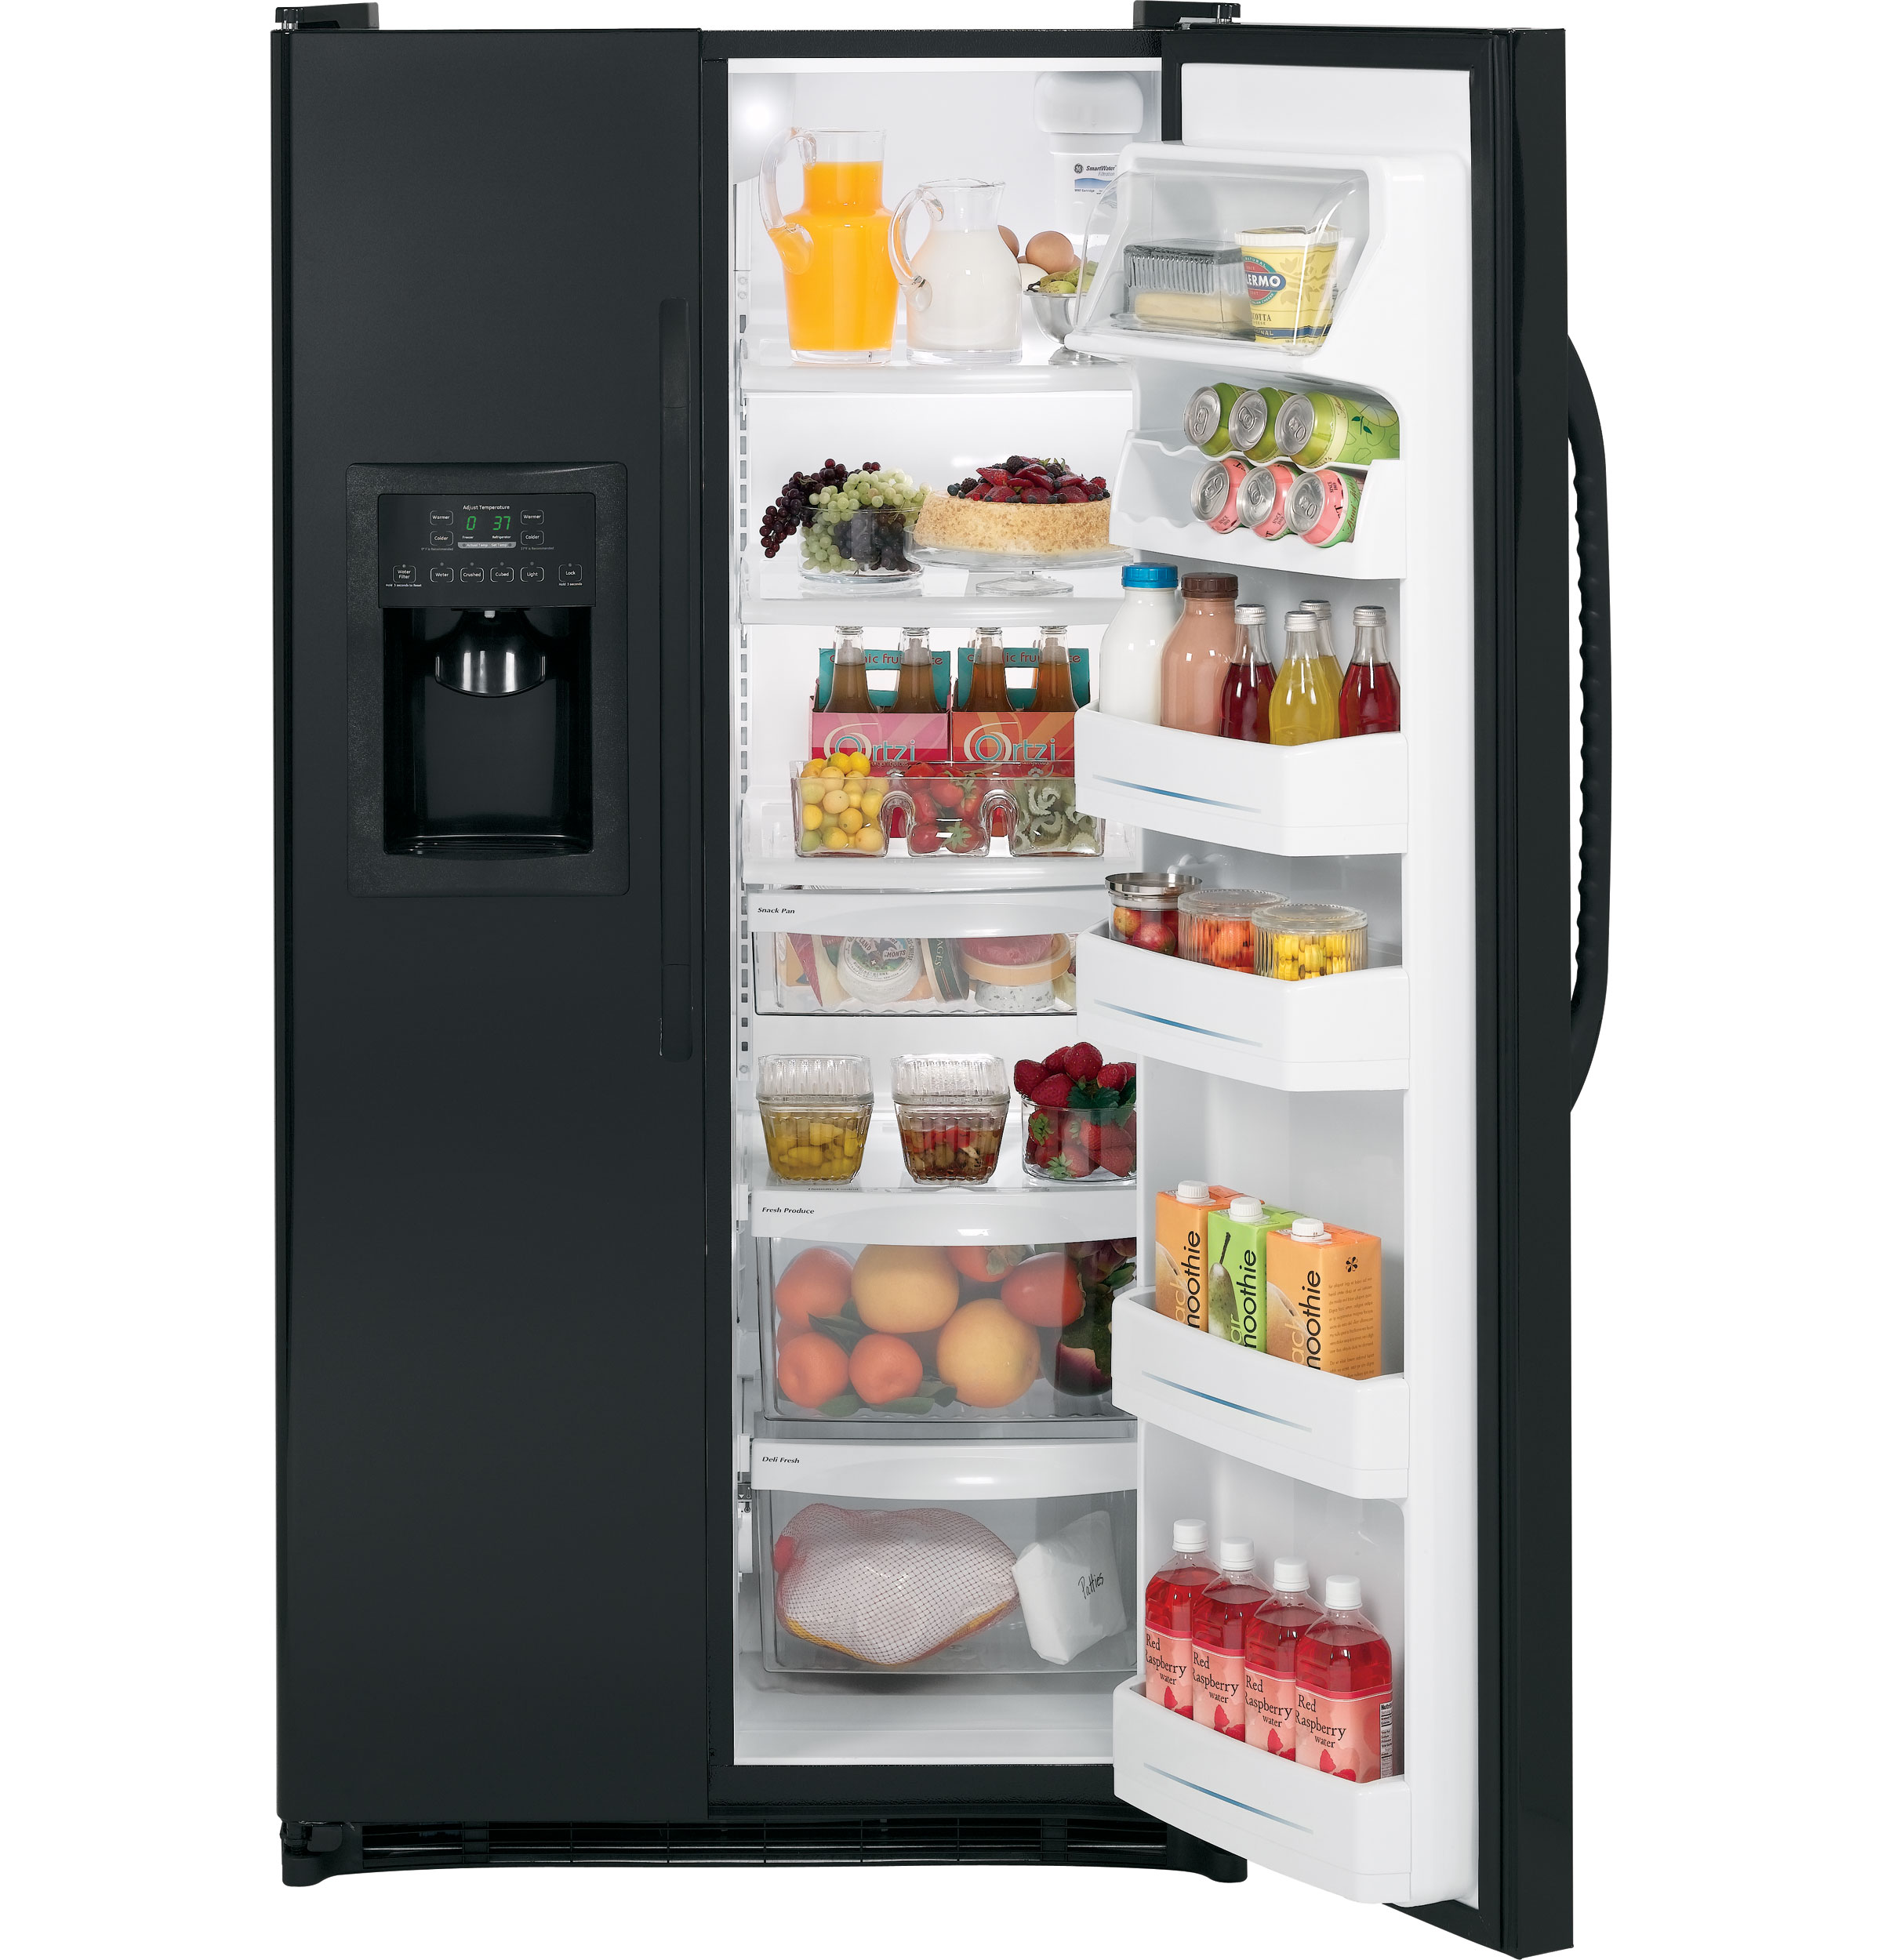 GE® ENERGY STAR® 25.0 Cu. Ft. Side-By-Side Refrigerator with Dispenser